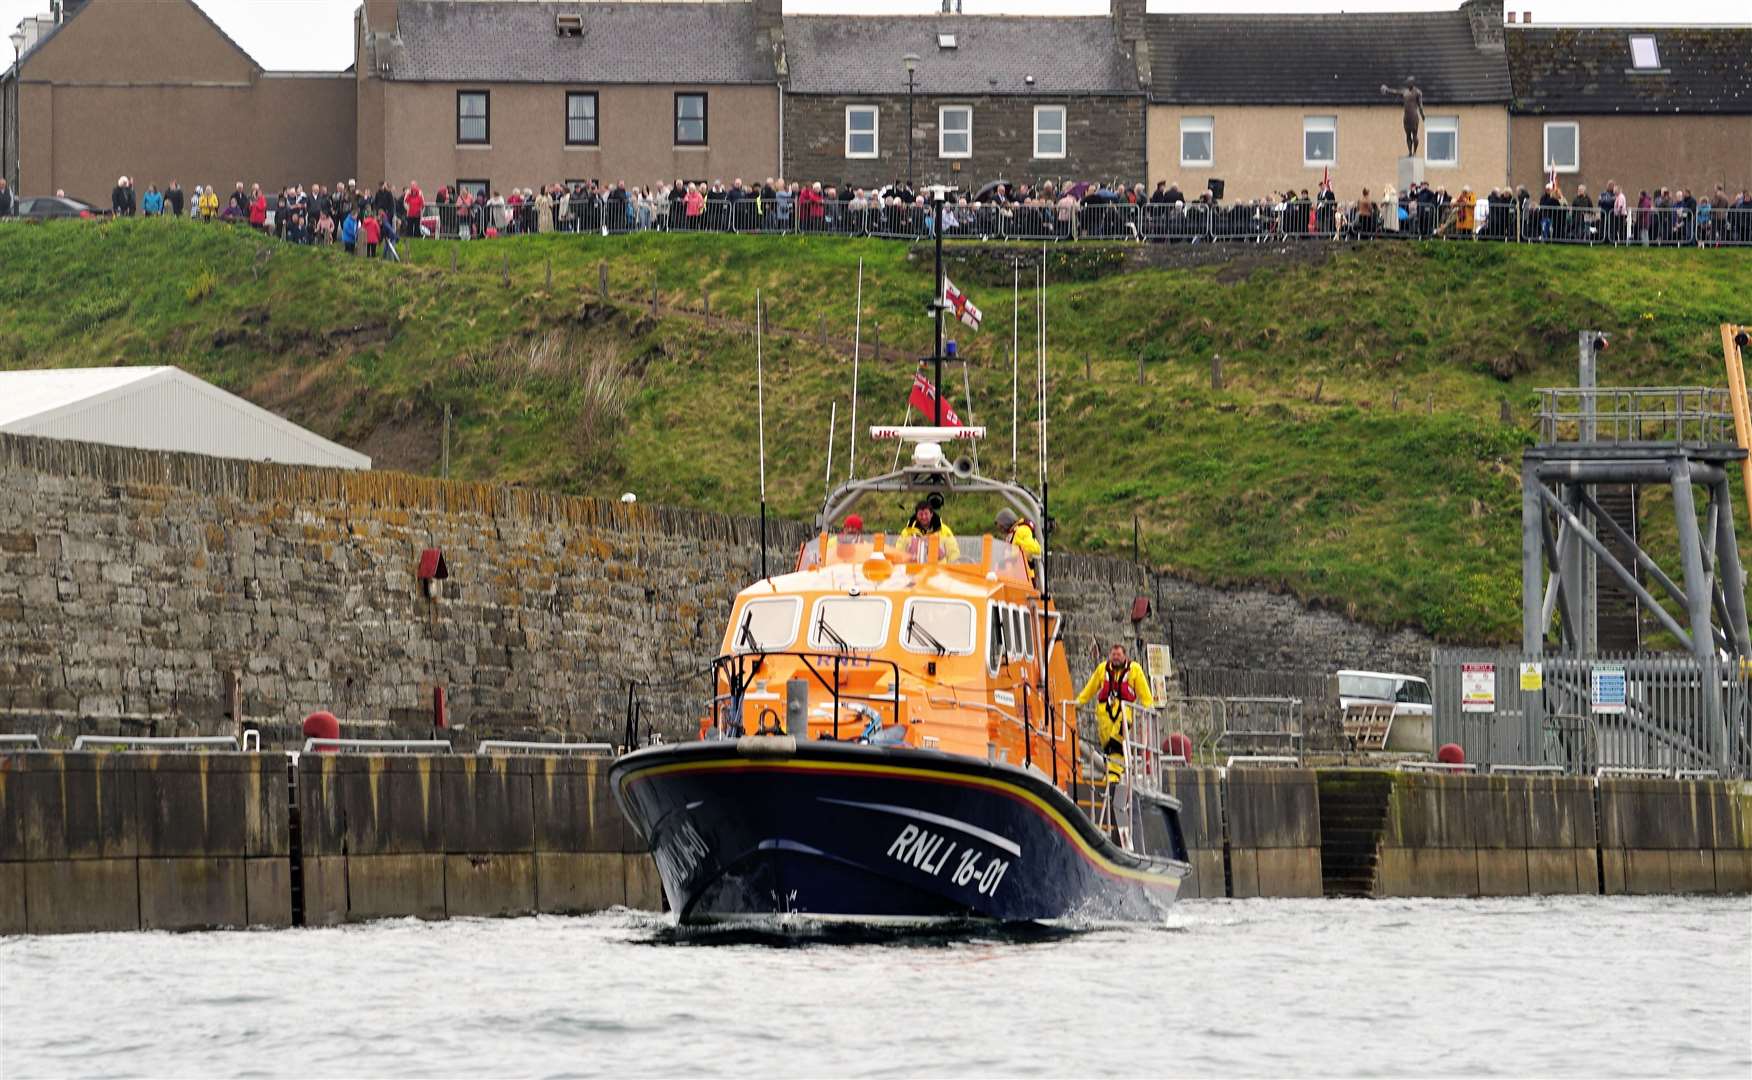 Longhope lifeboat making its way out to Wick Bay, with crowds lining the Braehead above. Picture: DGS